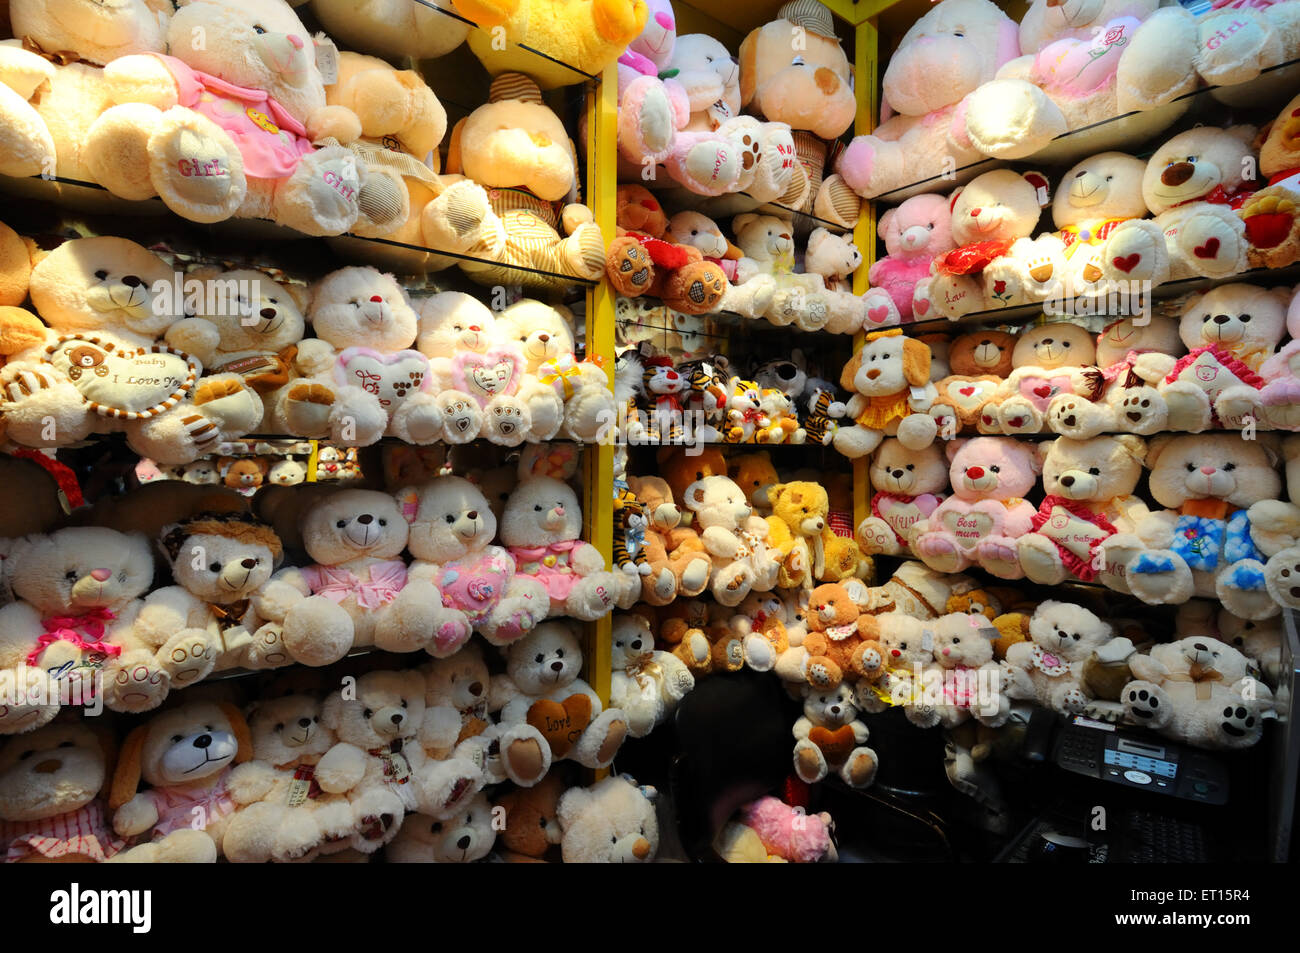 Display of stuffed toys in Chinese shop ; Yiwu ; China Stock Photo